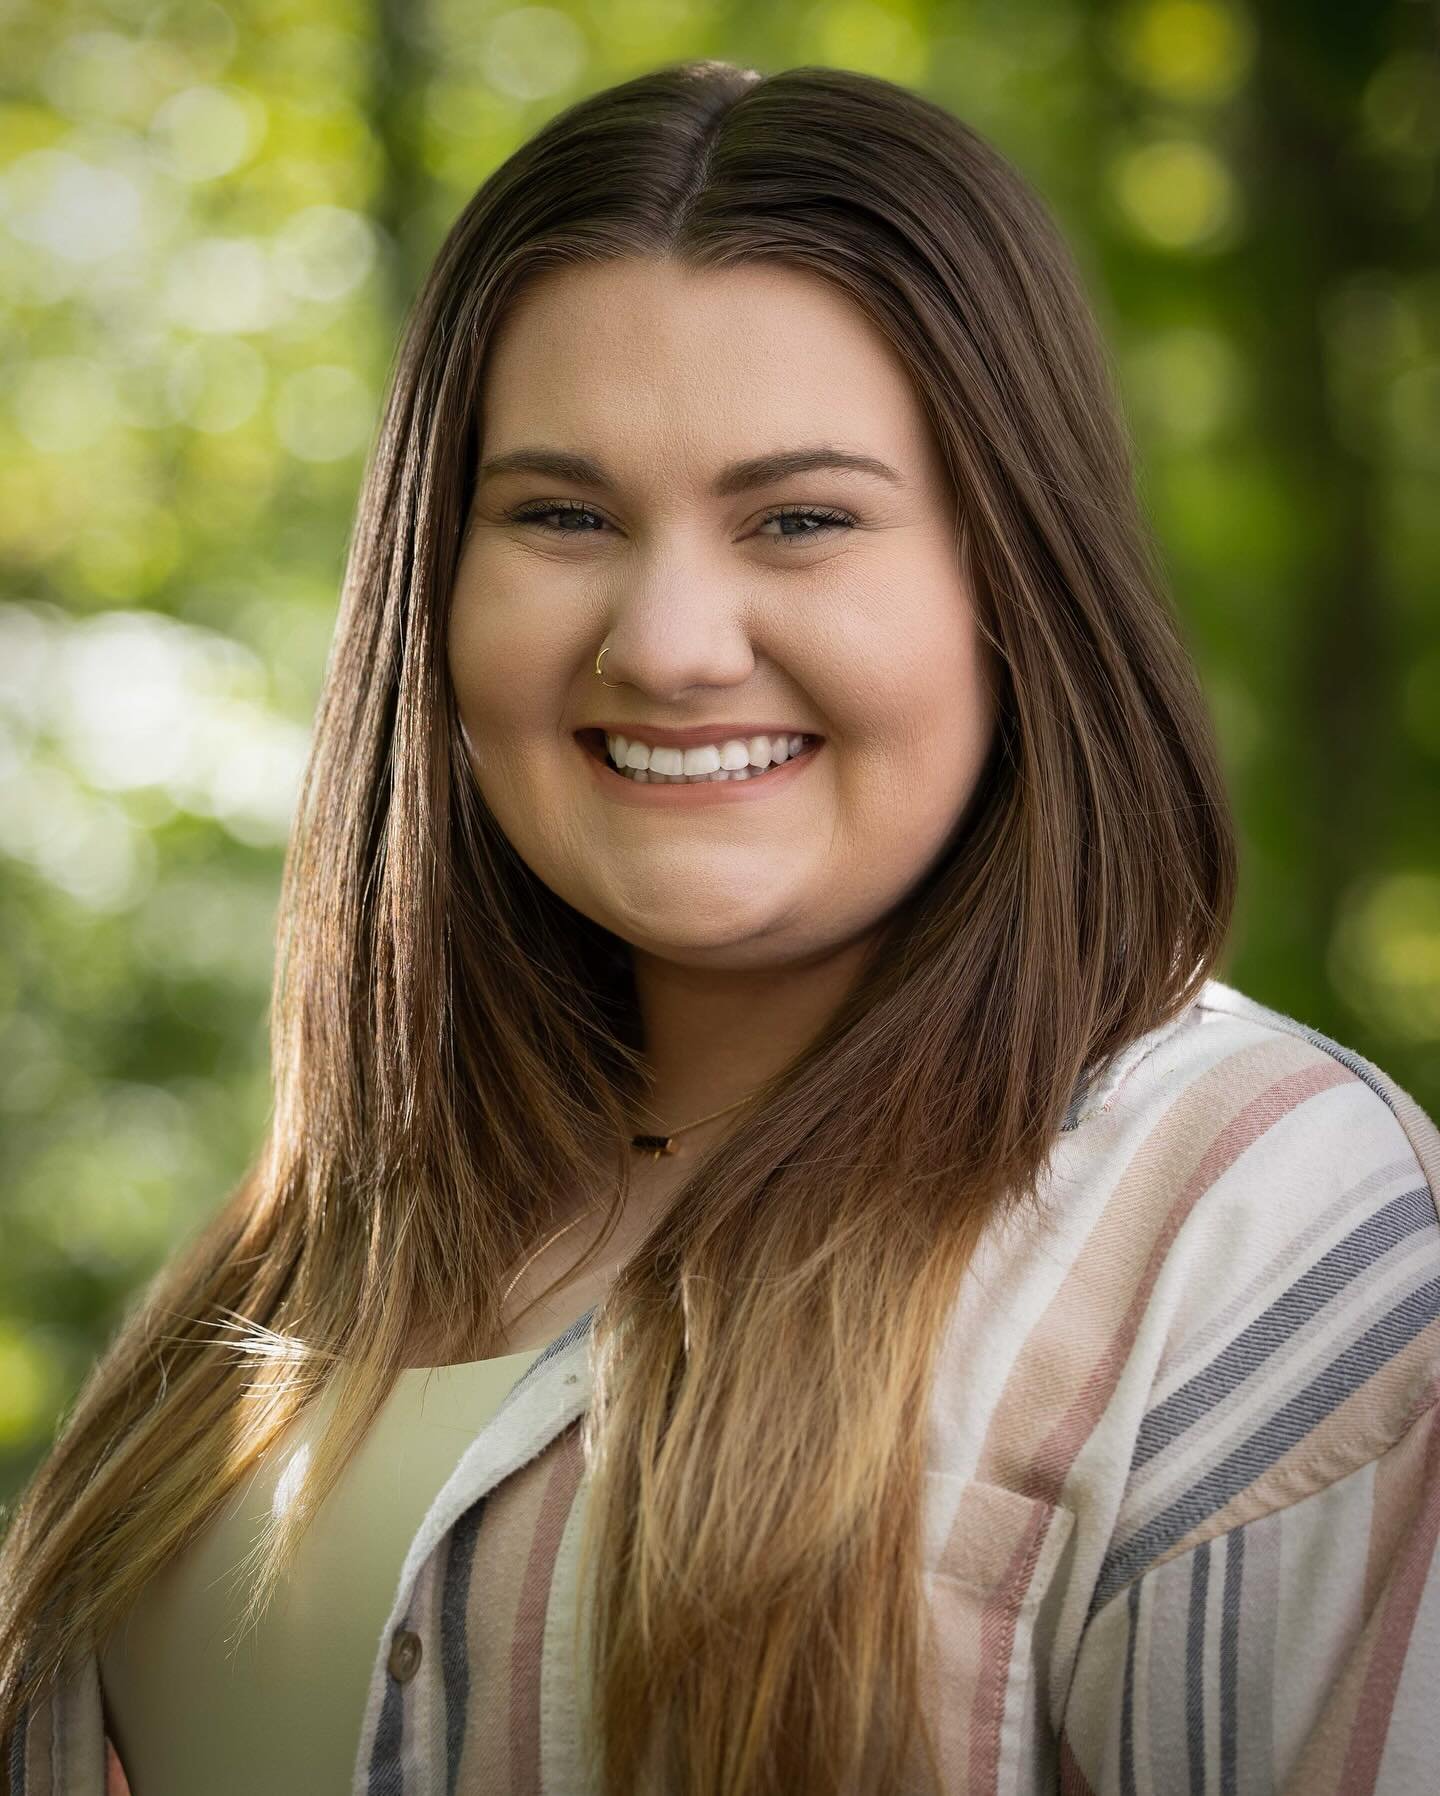 Meet the newest member of the Motif Homes team - Brooke! 

Brooke recently moved to Greensboro, North Carolina from Tulsa, Oklahoma, with her husband and two children. Brooke is an Extern and will be working with Motif Homes to earn hours for her int